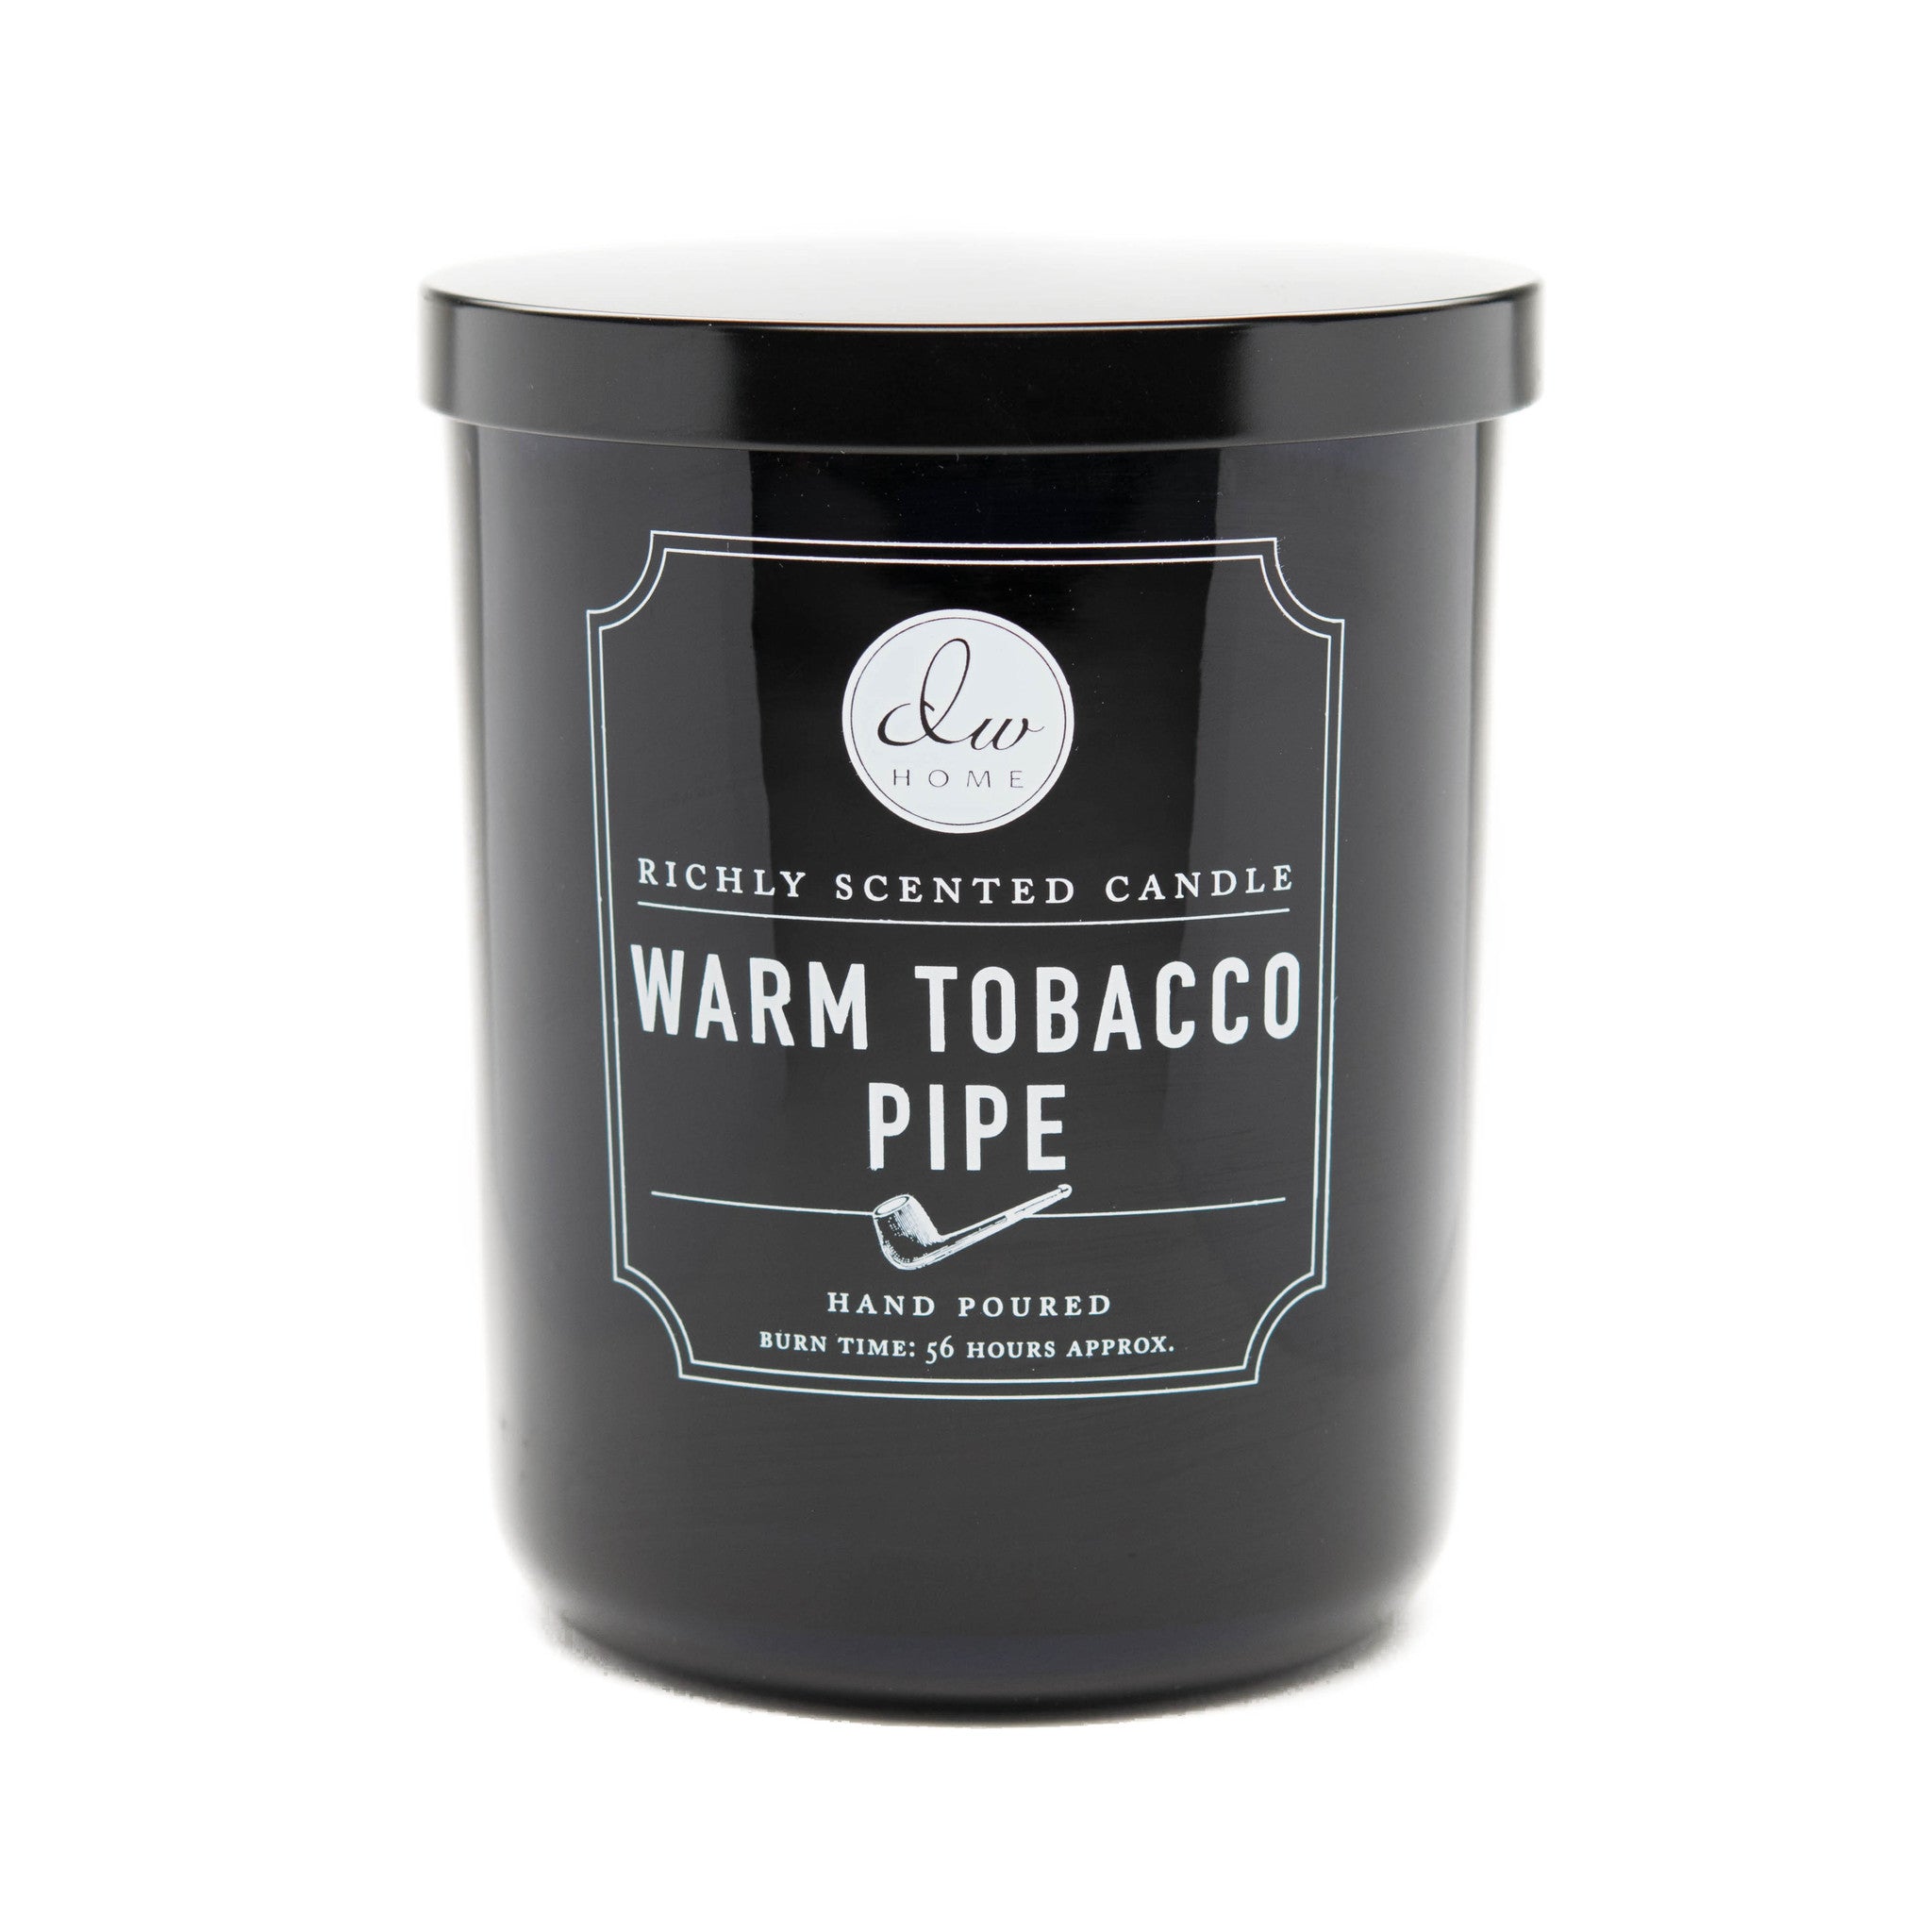 RICHLY SCENTED CANDLE ARSI RS WARM TOBACCO PIPE HAND POURED BURN TIME: 56 HOURS APPROX. 